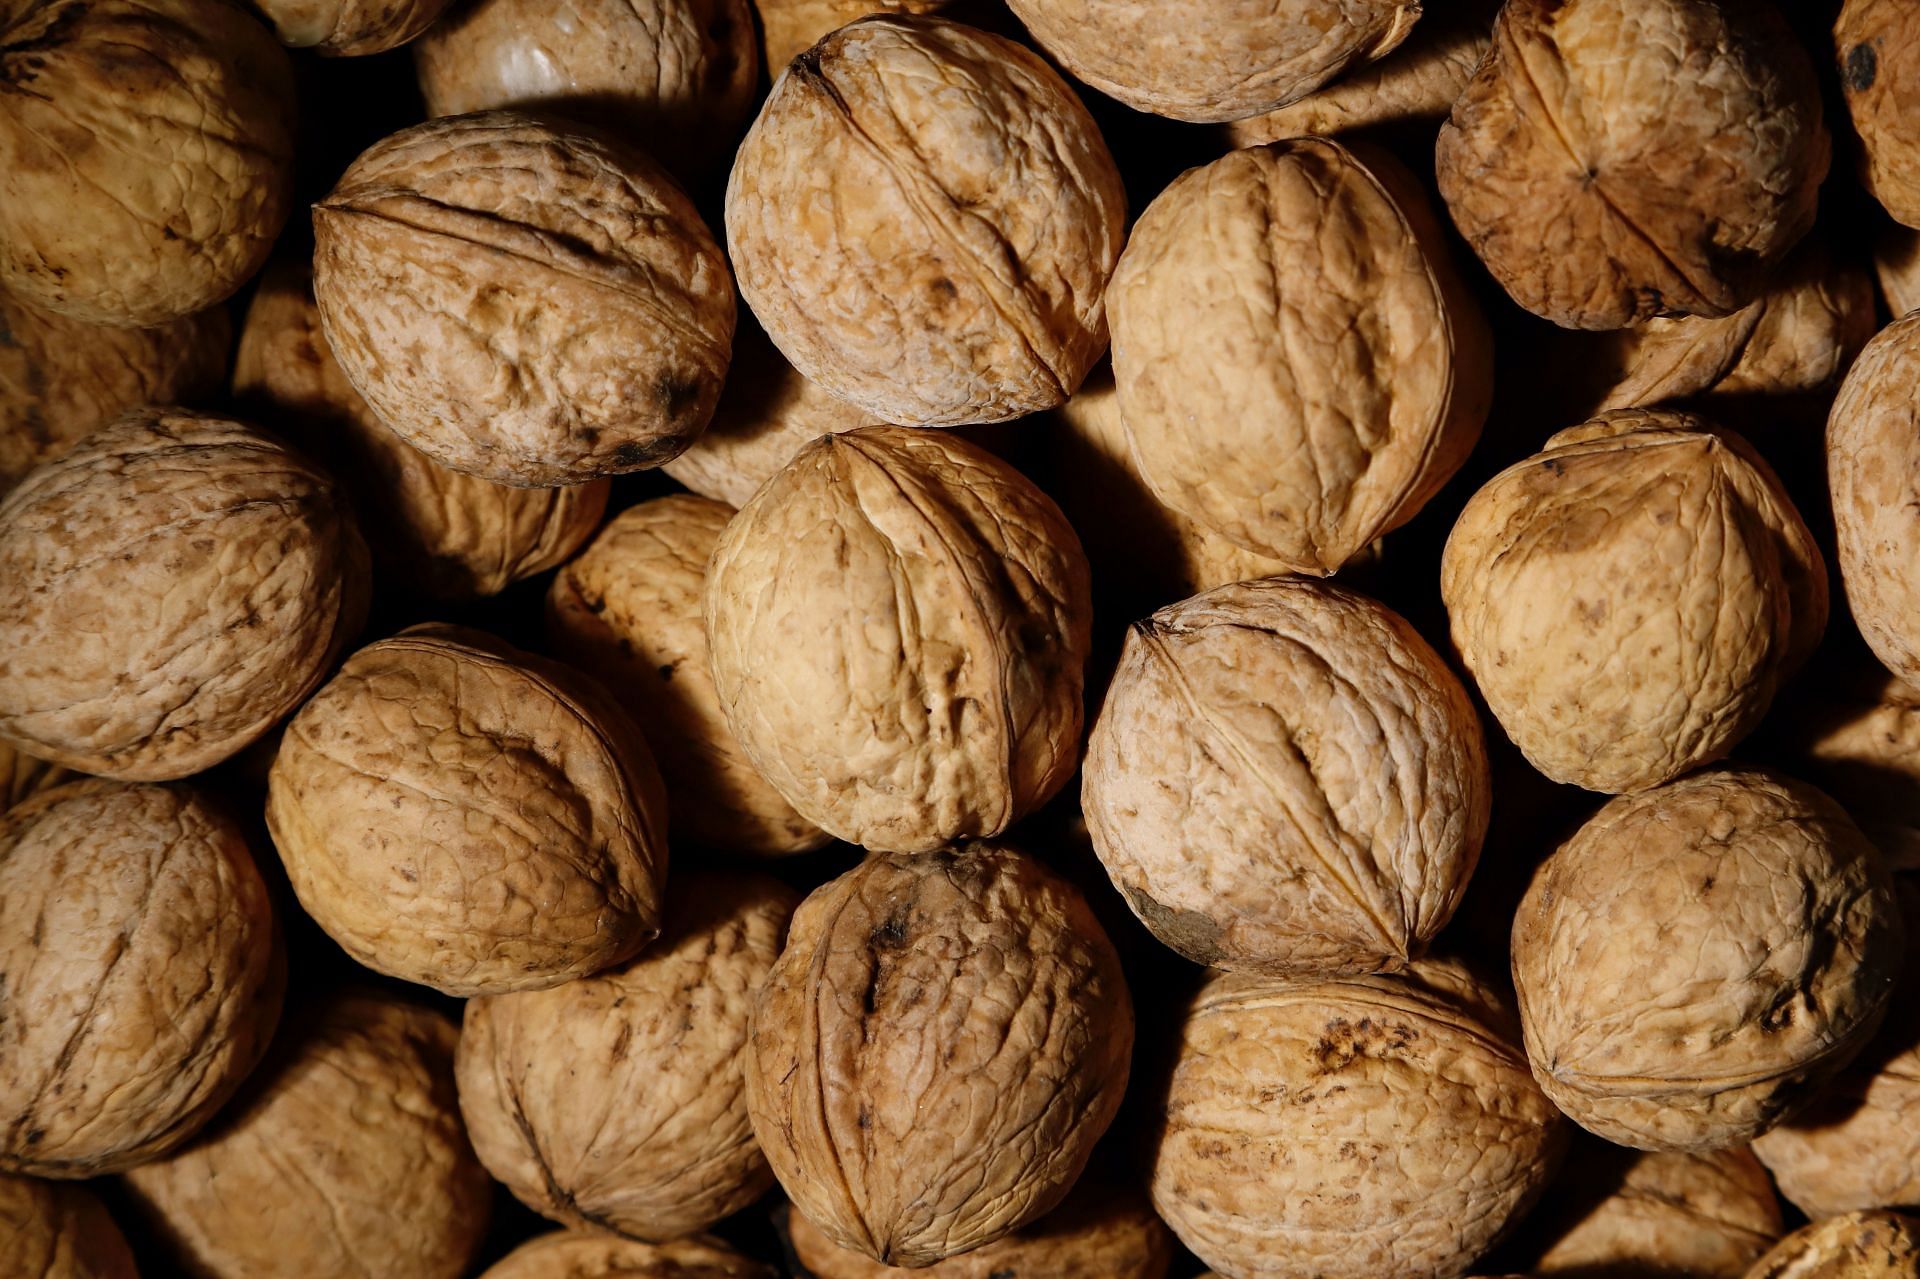 Walnuts are a rich source of omega-3 fatty acids for eye health. (Image via Pexels)